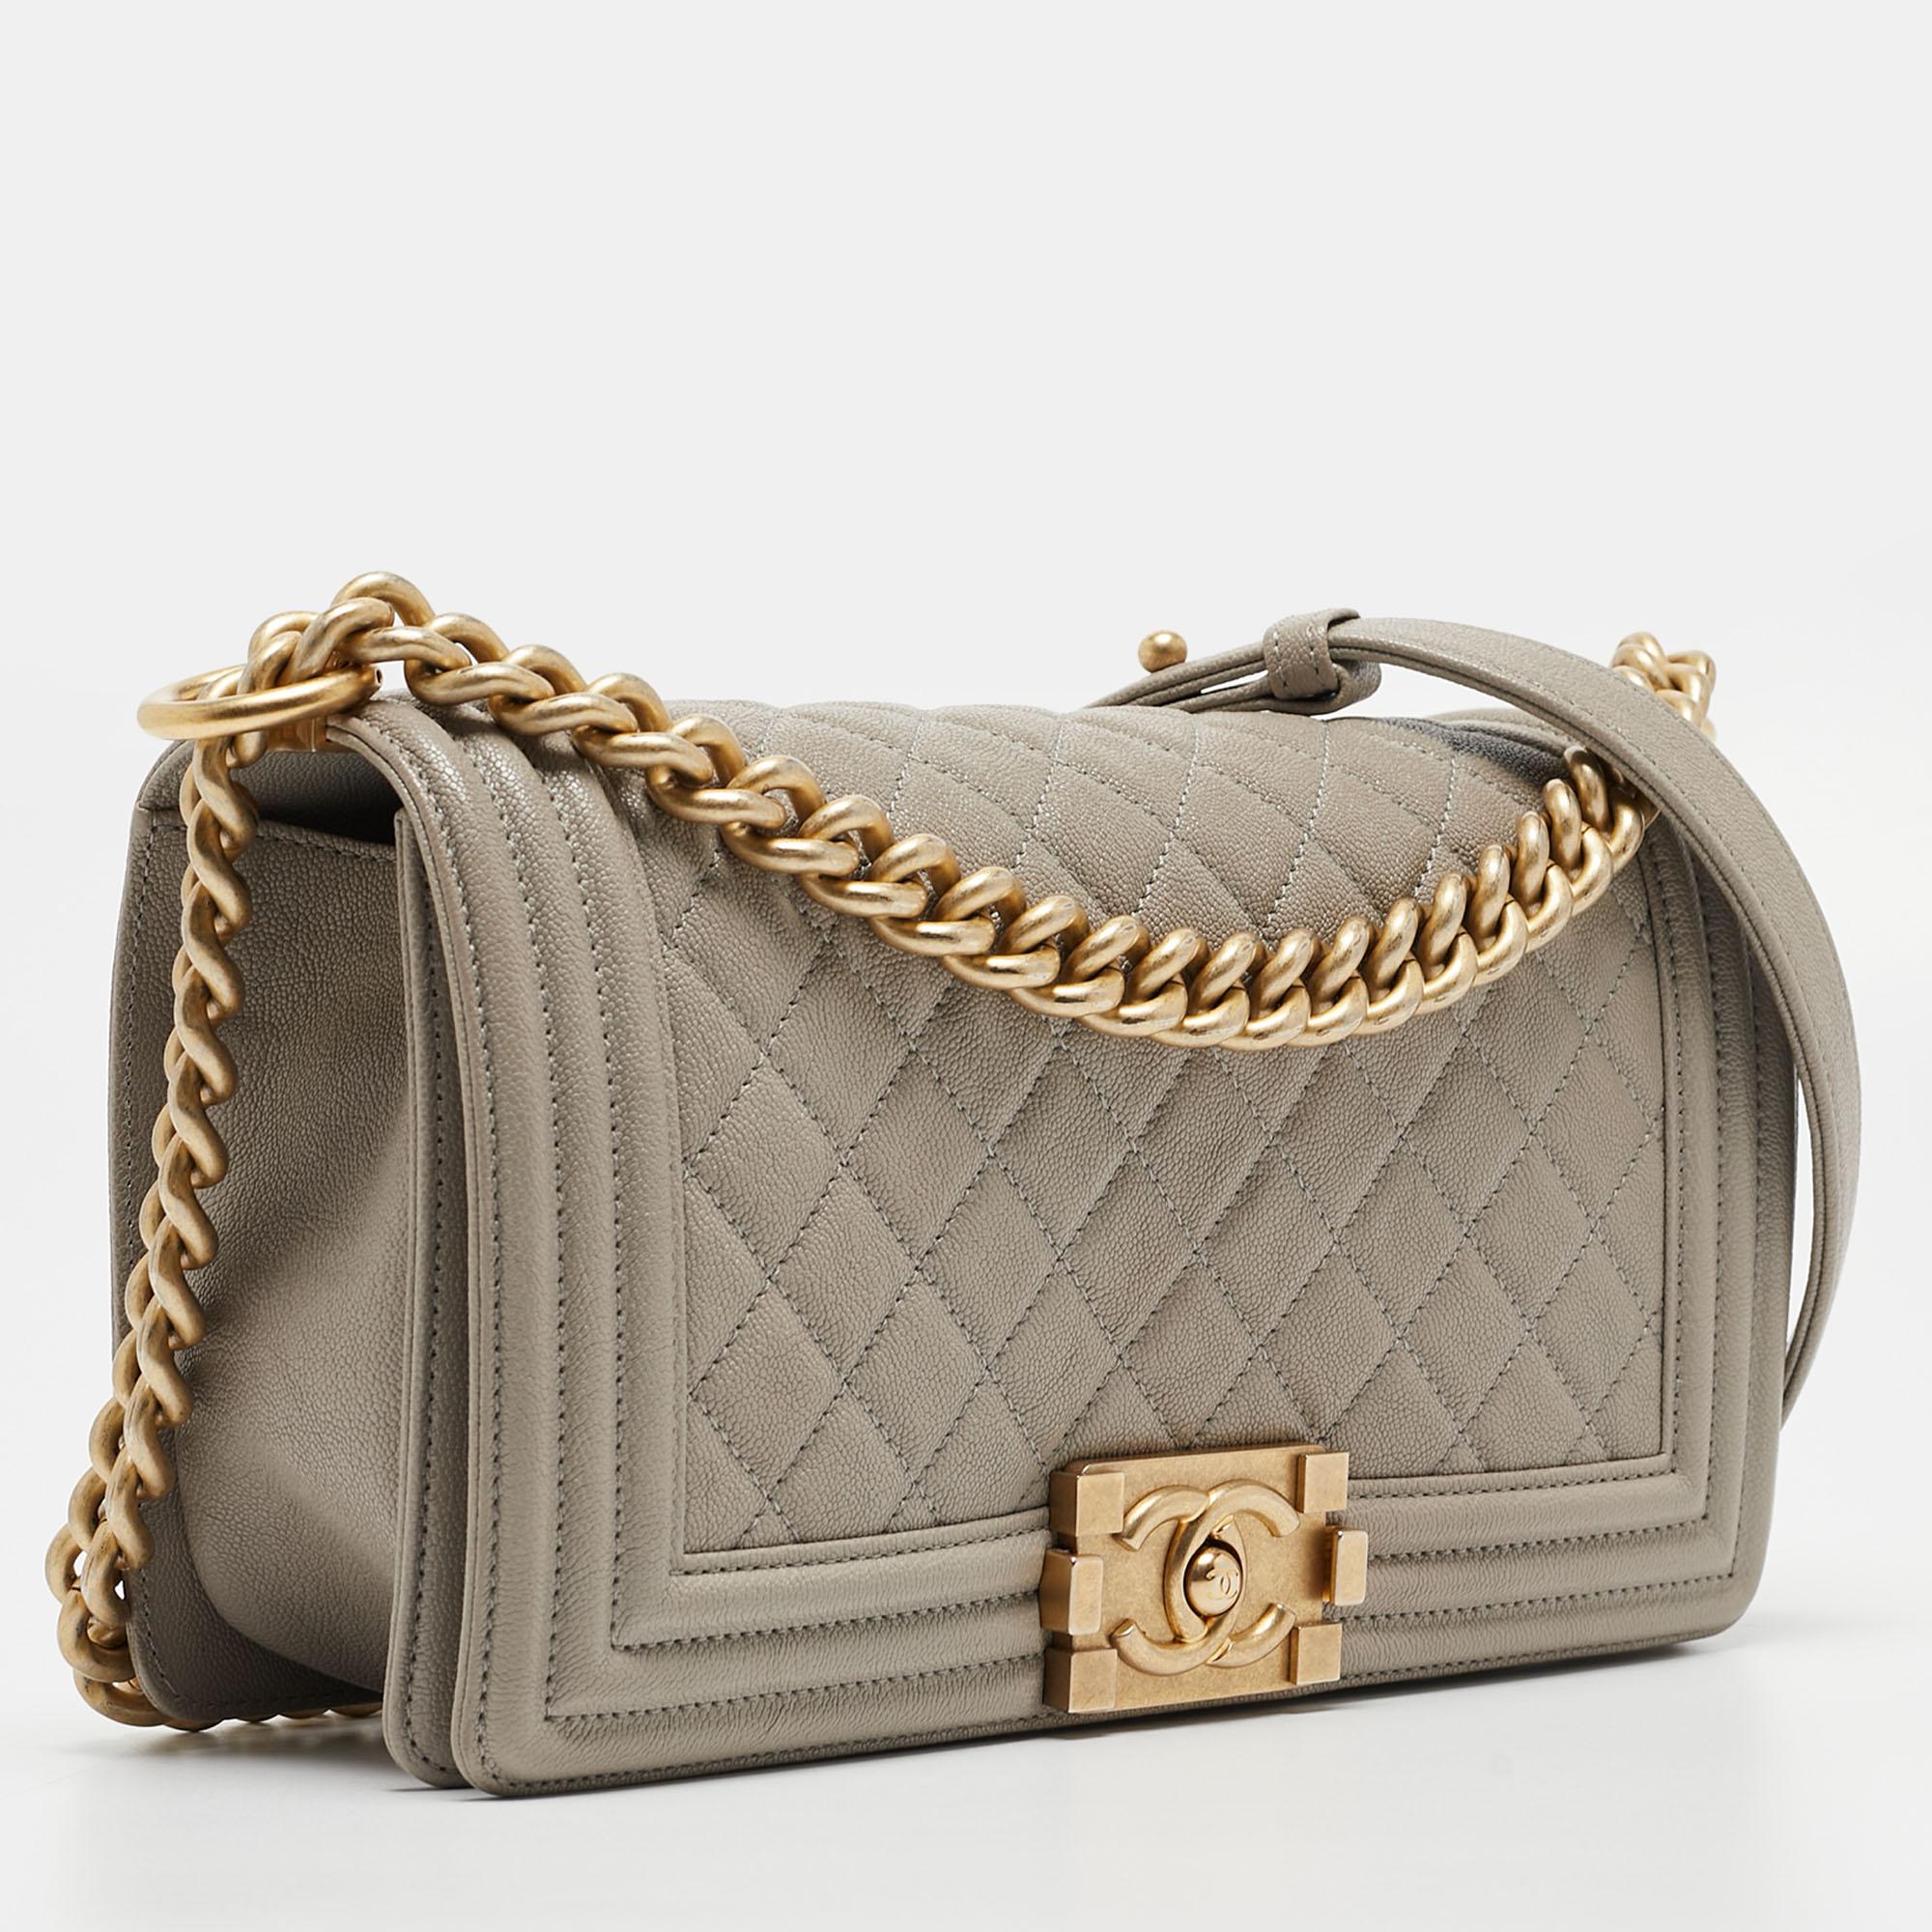 As one of Chanel's most loved bag styles, the Boy Flap is a great fashion investment. Its timeless appeal, coupled with the House's excellent artisanship, makes the bag valuable. This medium-sized Boy Flap bag for women is made of quilted leather